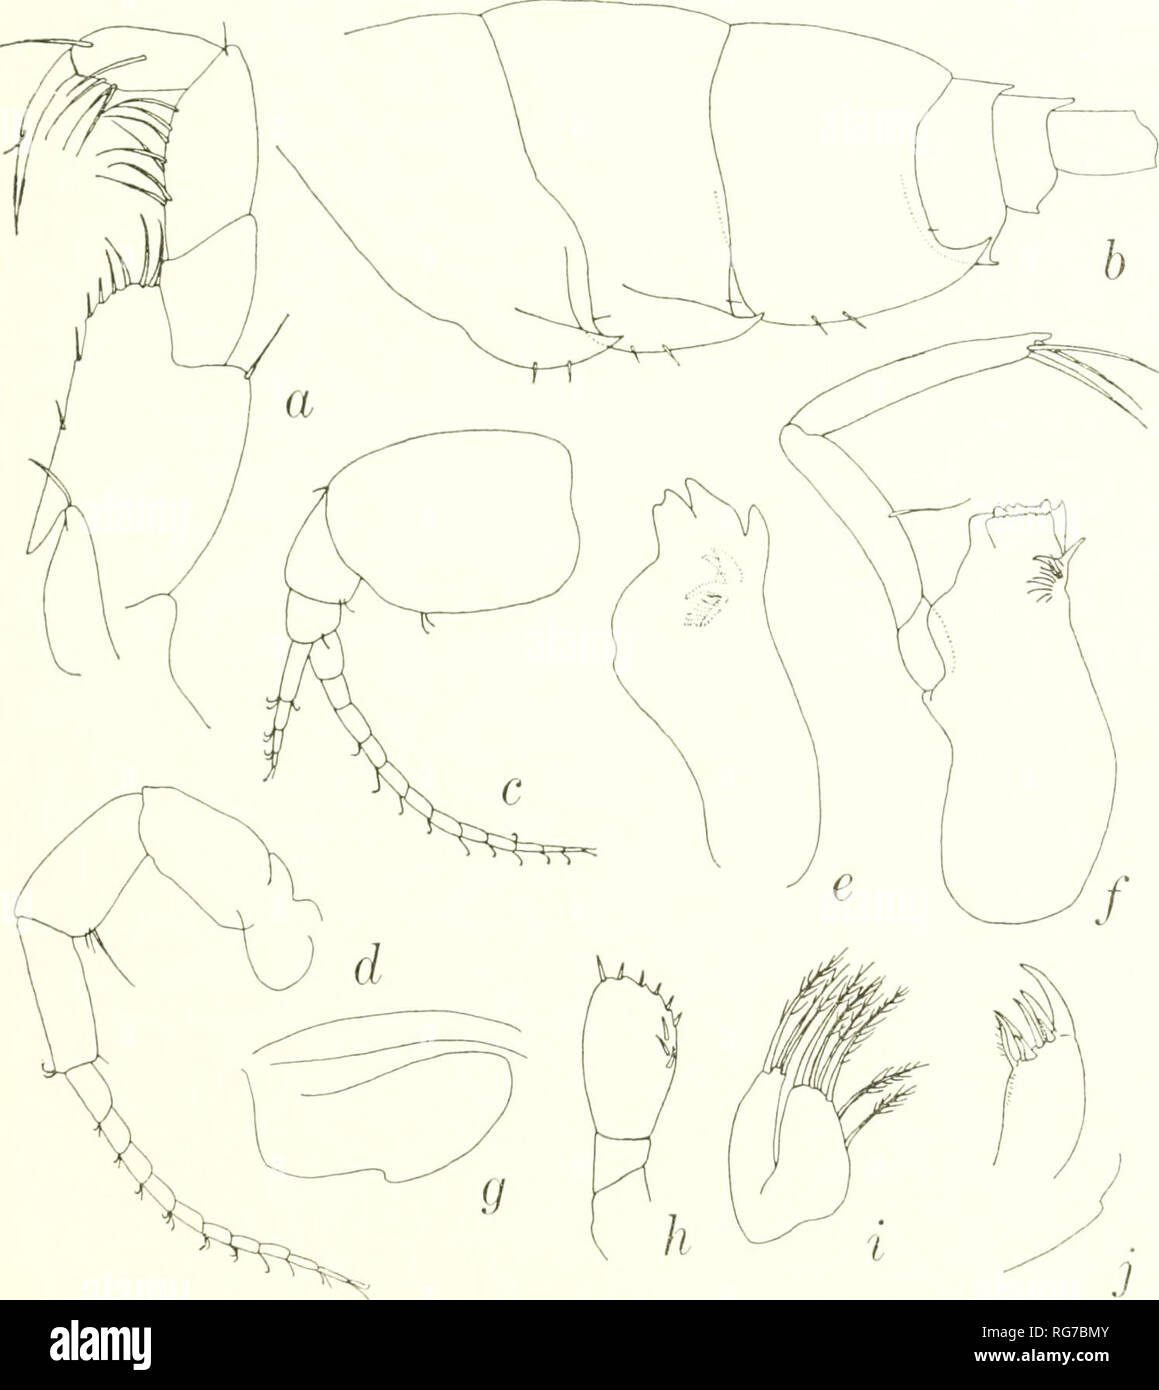 . Bulletin - United States National Museum. Science. GAMMARIDEAN AMPHIPODA 127 sixtli articles, fourth and fifth articles of medium expansion; second articles of gnathopods and pereopods 1 and 2 attached nearly at proximal margins of coxae; pereopods 3 and 5 remarkably mterdistinct in size and length, pereopod 3 short, article 2 slender, pereopod 4 long,. Figure 61.—Pardaliscopsis (?) copal, new species, holotype, female, 4.4 mm, 7231: a, maxilliped; b, pleon, left; c,d, antennae 1,2; e, right mandible, outer surface;/, left man- dible; g, labrum; h, palp of maxilla 1; i, maxilla 2;;, outer lo Stock Photo